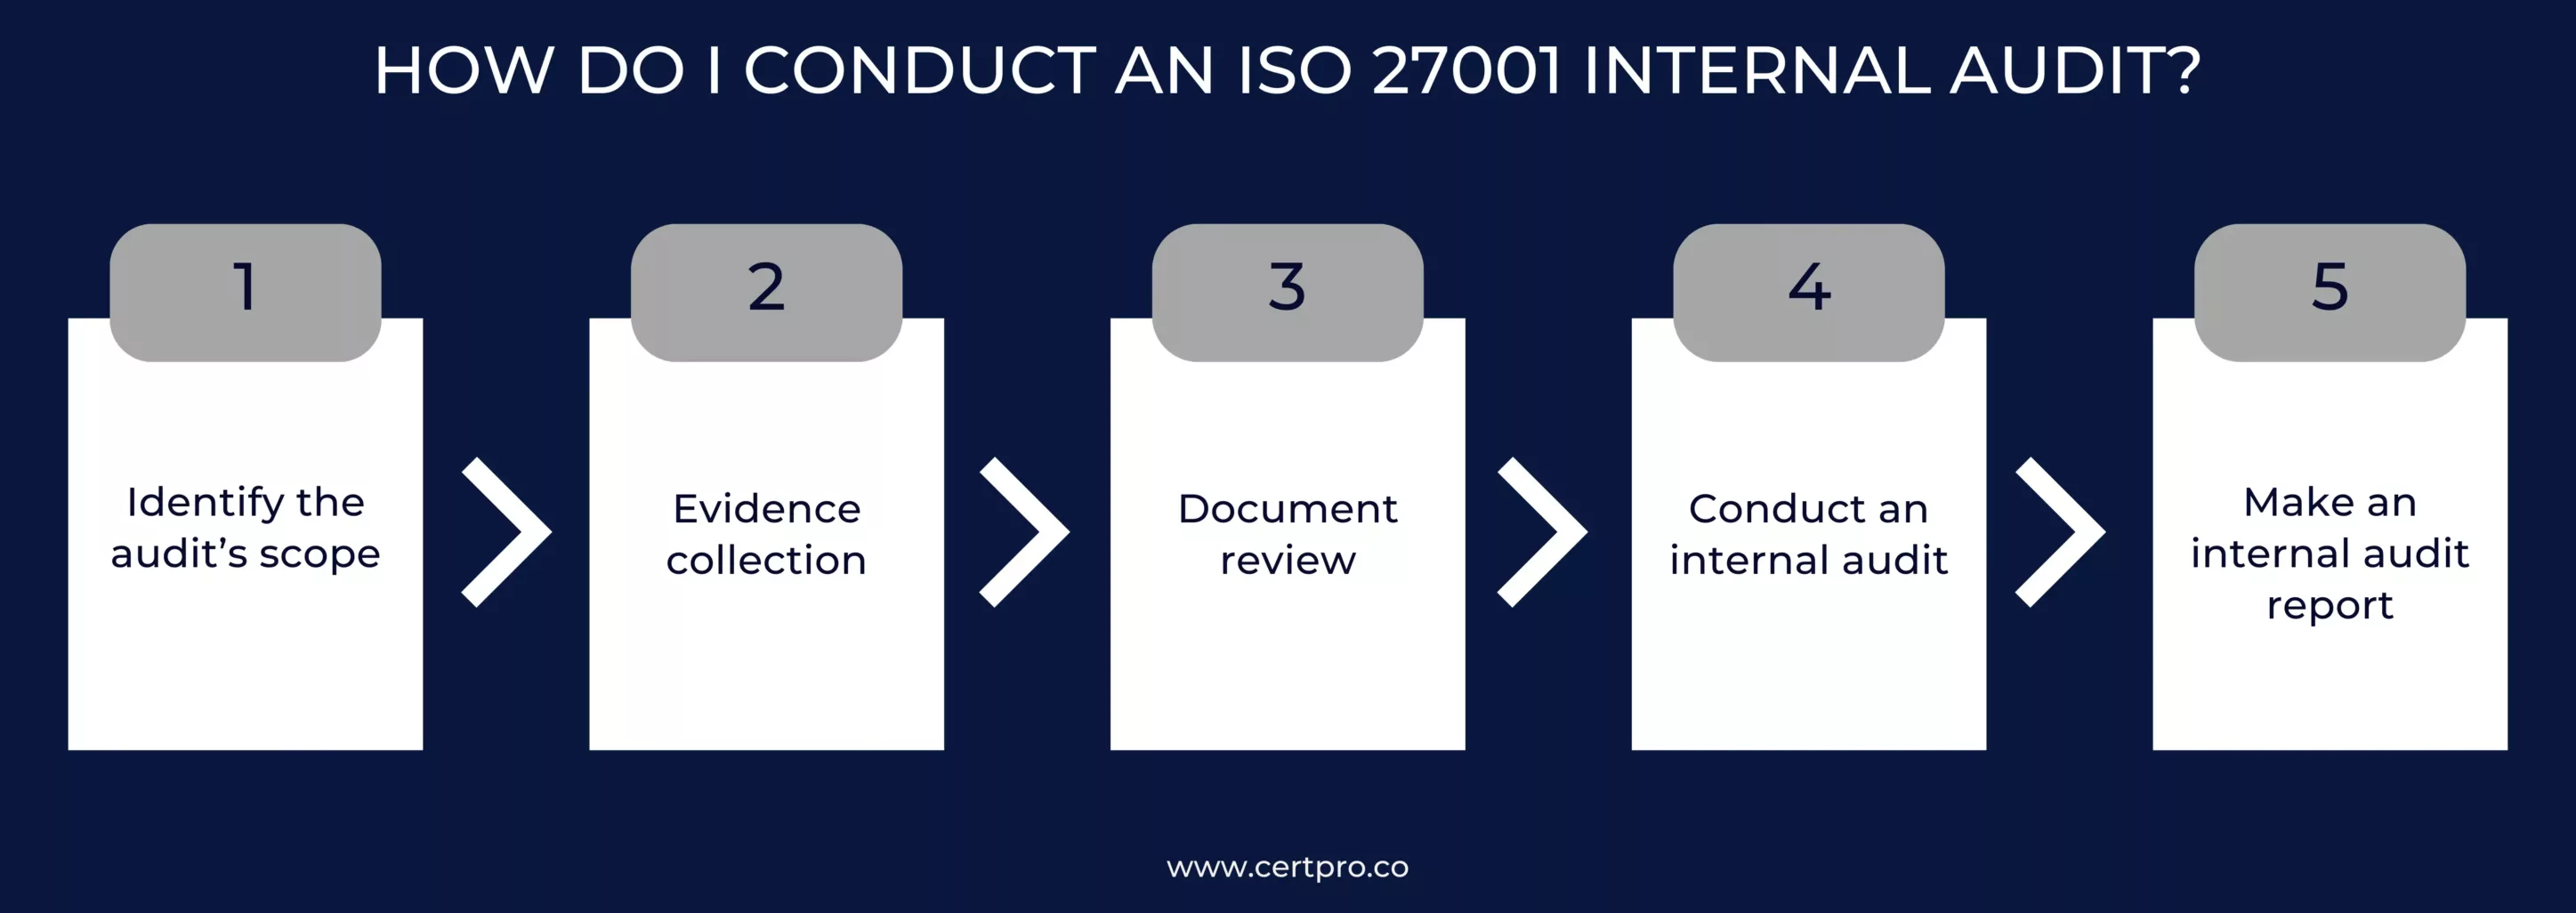 HOW DO I CONDUCT AN ISO 27001 INTERNAL AUDIT